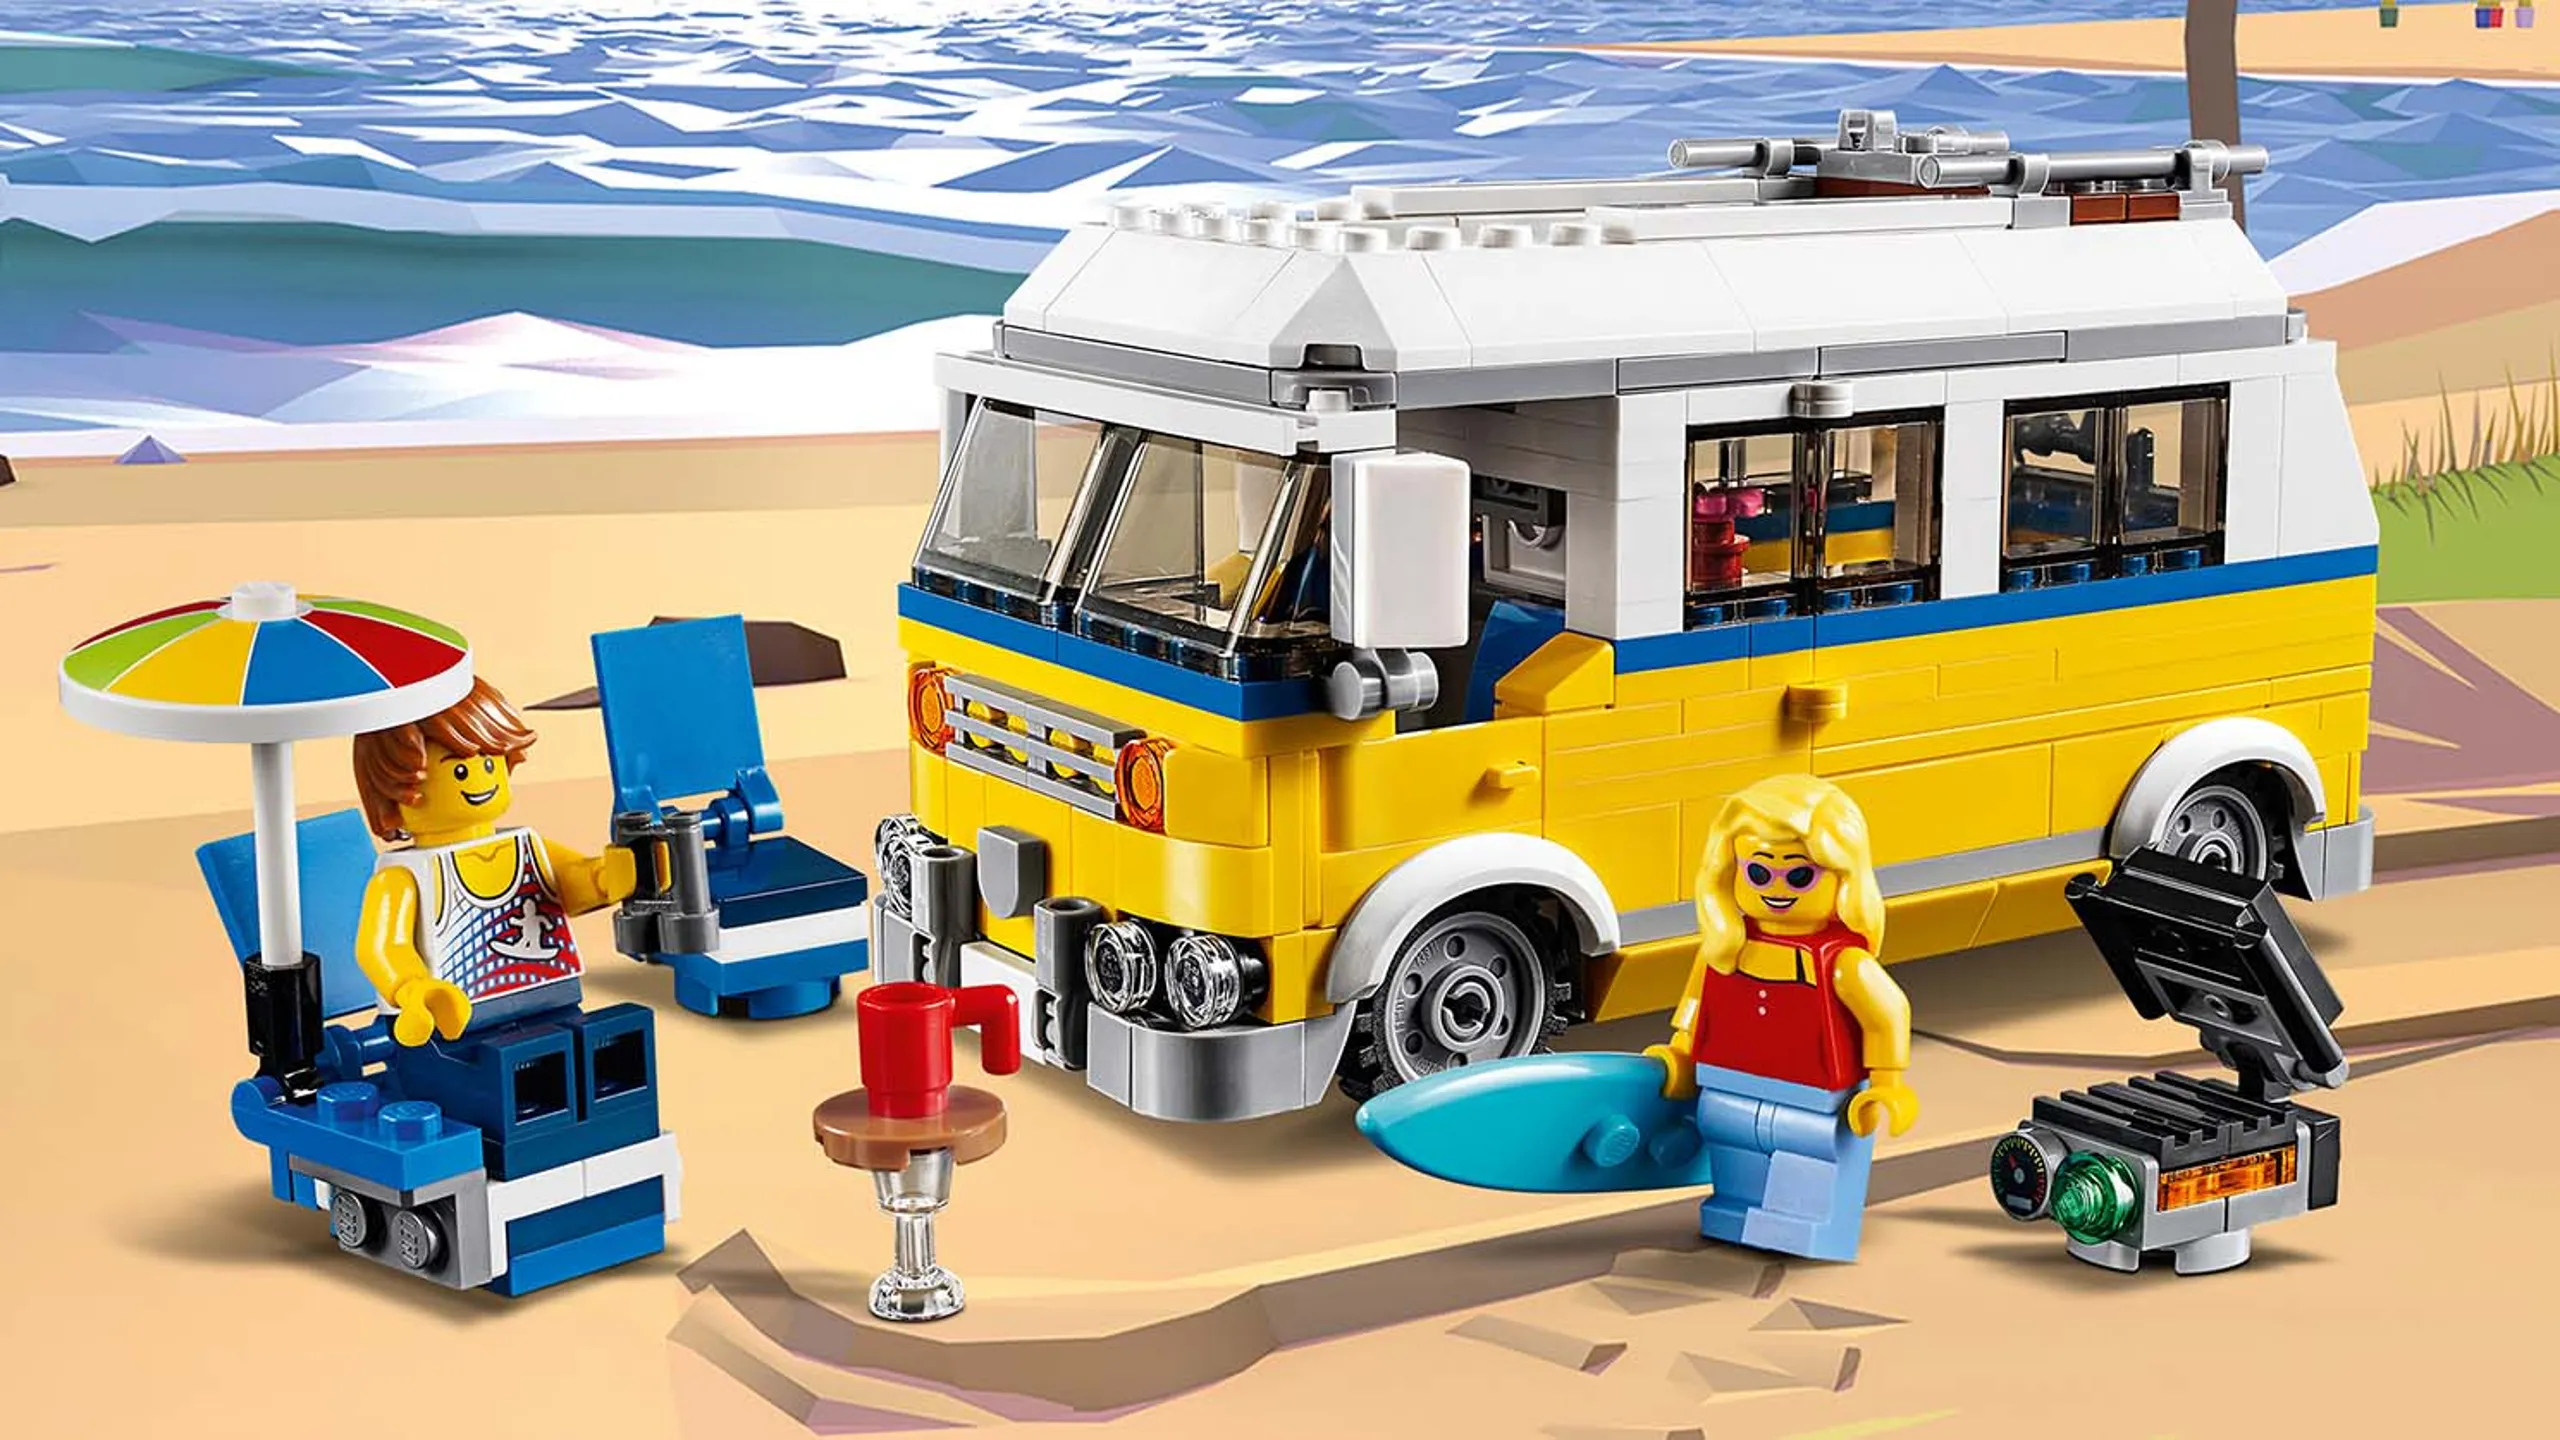 LEGO Creator 3-in-1 Sunshine Surfer Van - 31079 - A van packed with surfboards and beach stuff is parked near the ocean.